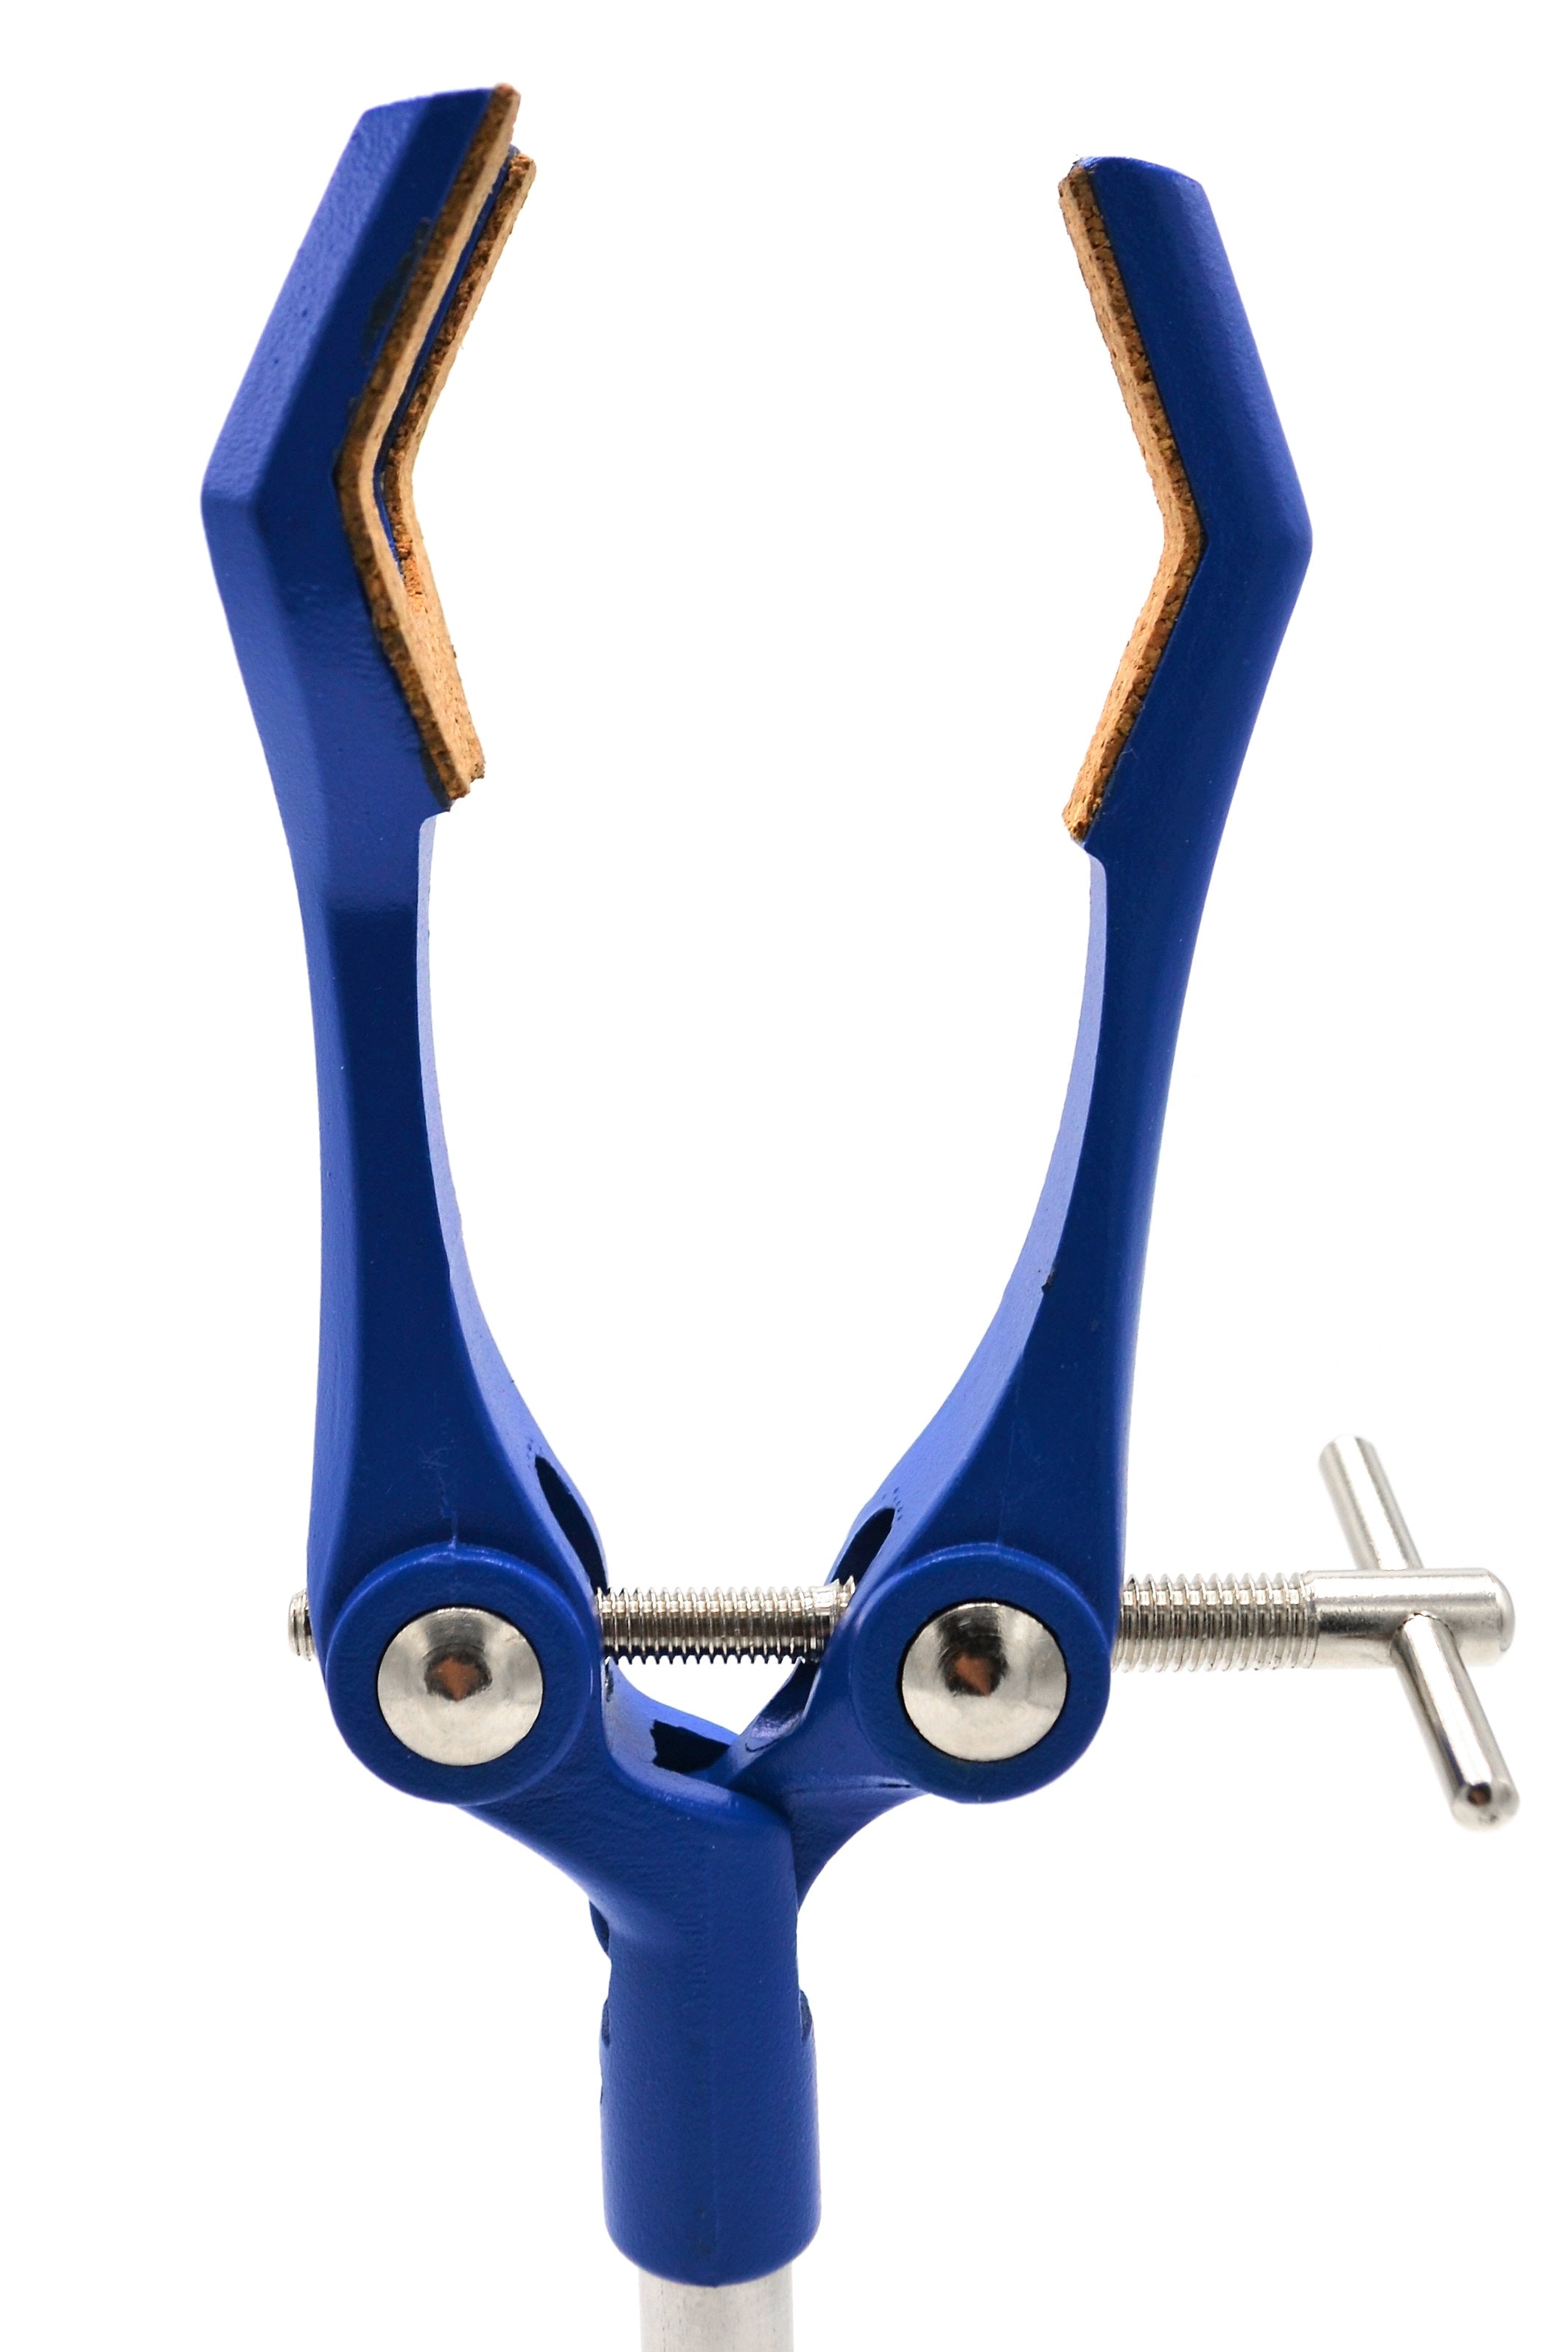 3 Finger, Cork Lined, Lab Clamp with Boss Head,  3.5" (8.9 cm) Maximum Clamp Opening